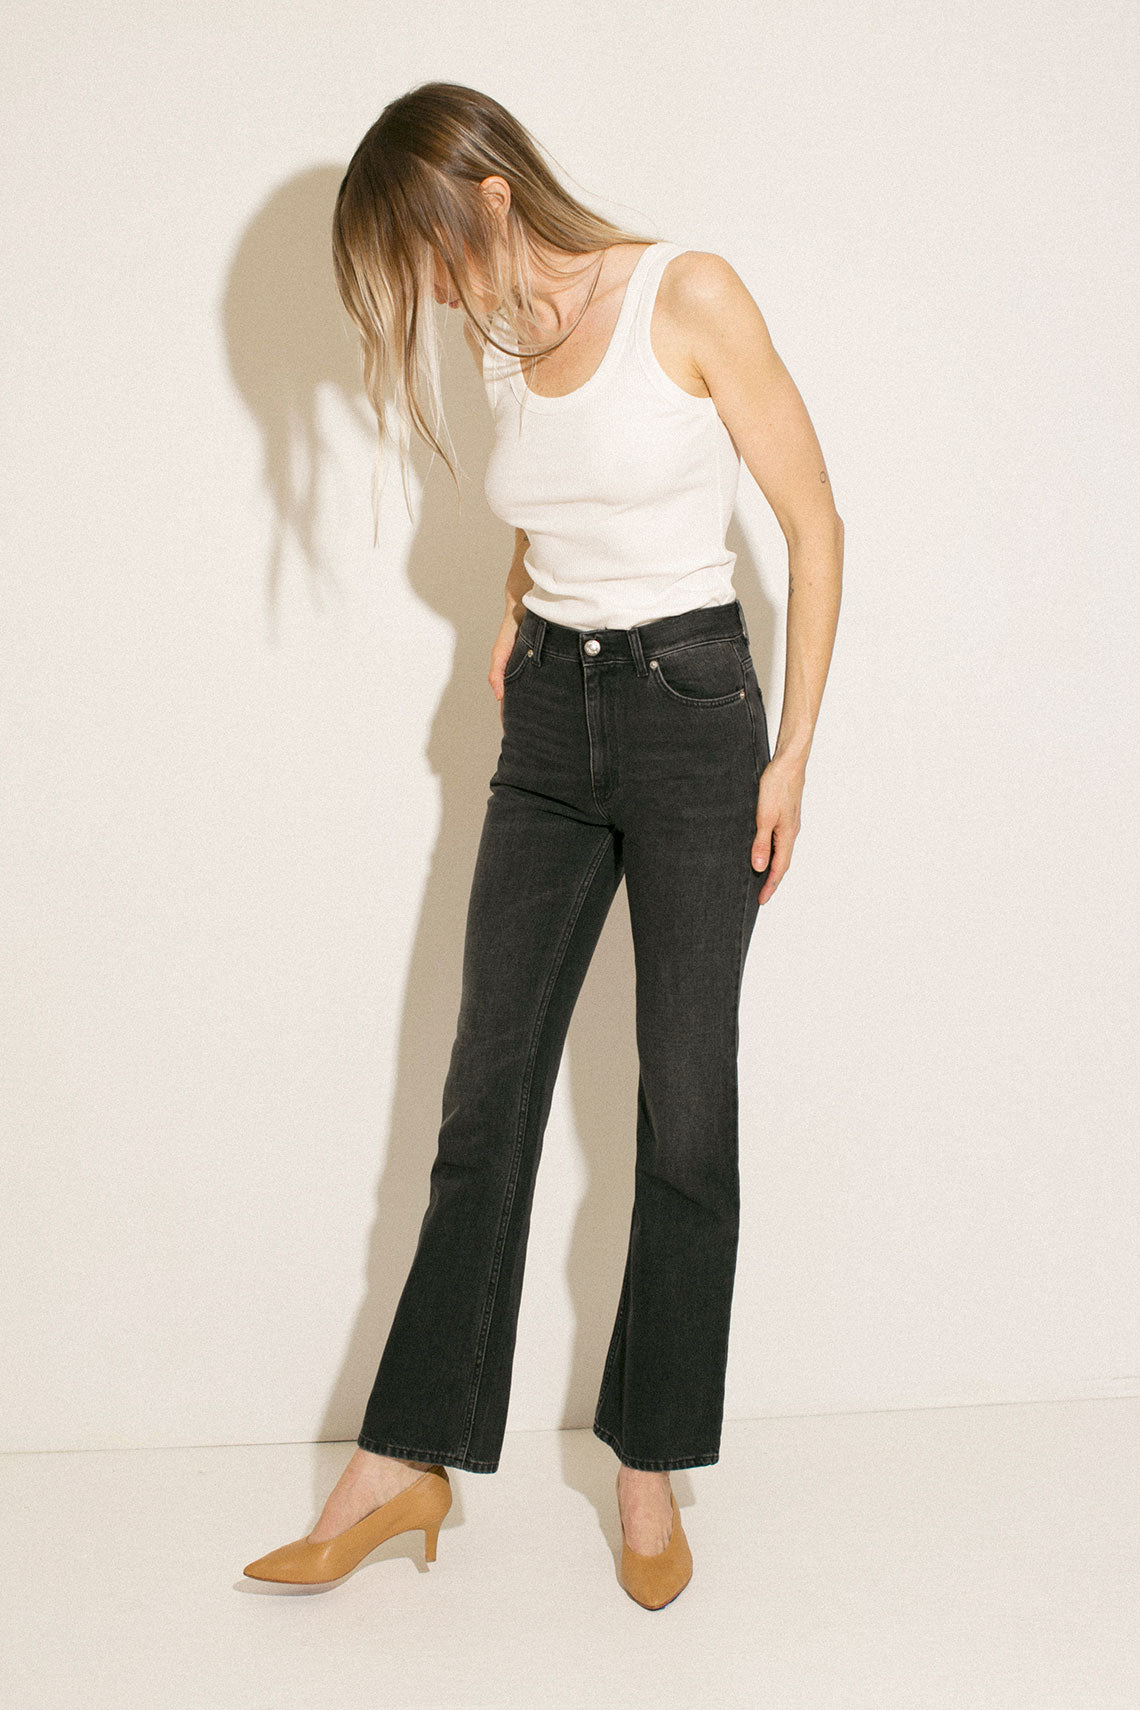 Faded Black Extended Flare Jean